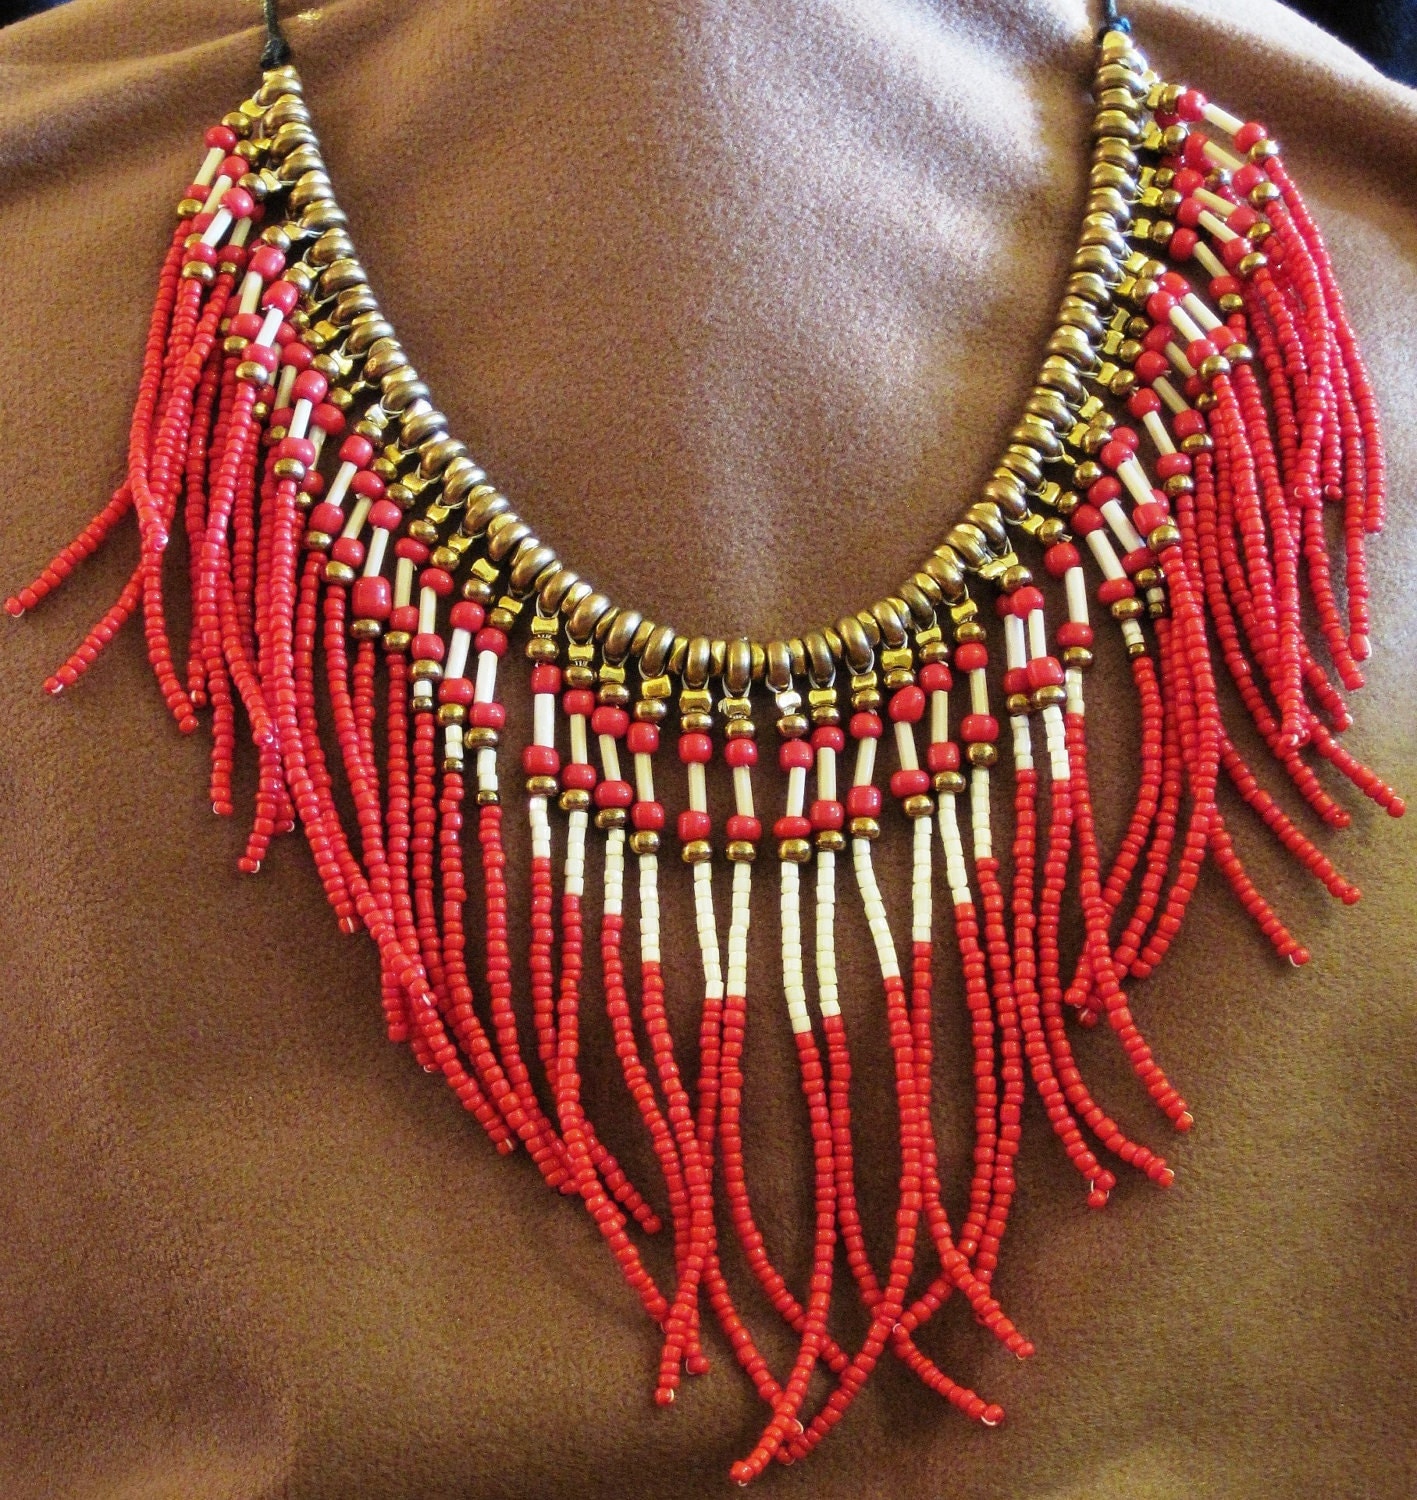 Native American style fringed necklace in red cream and gold